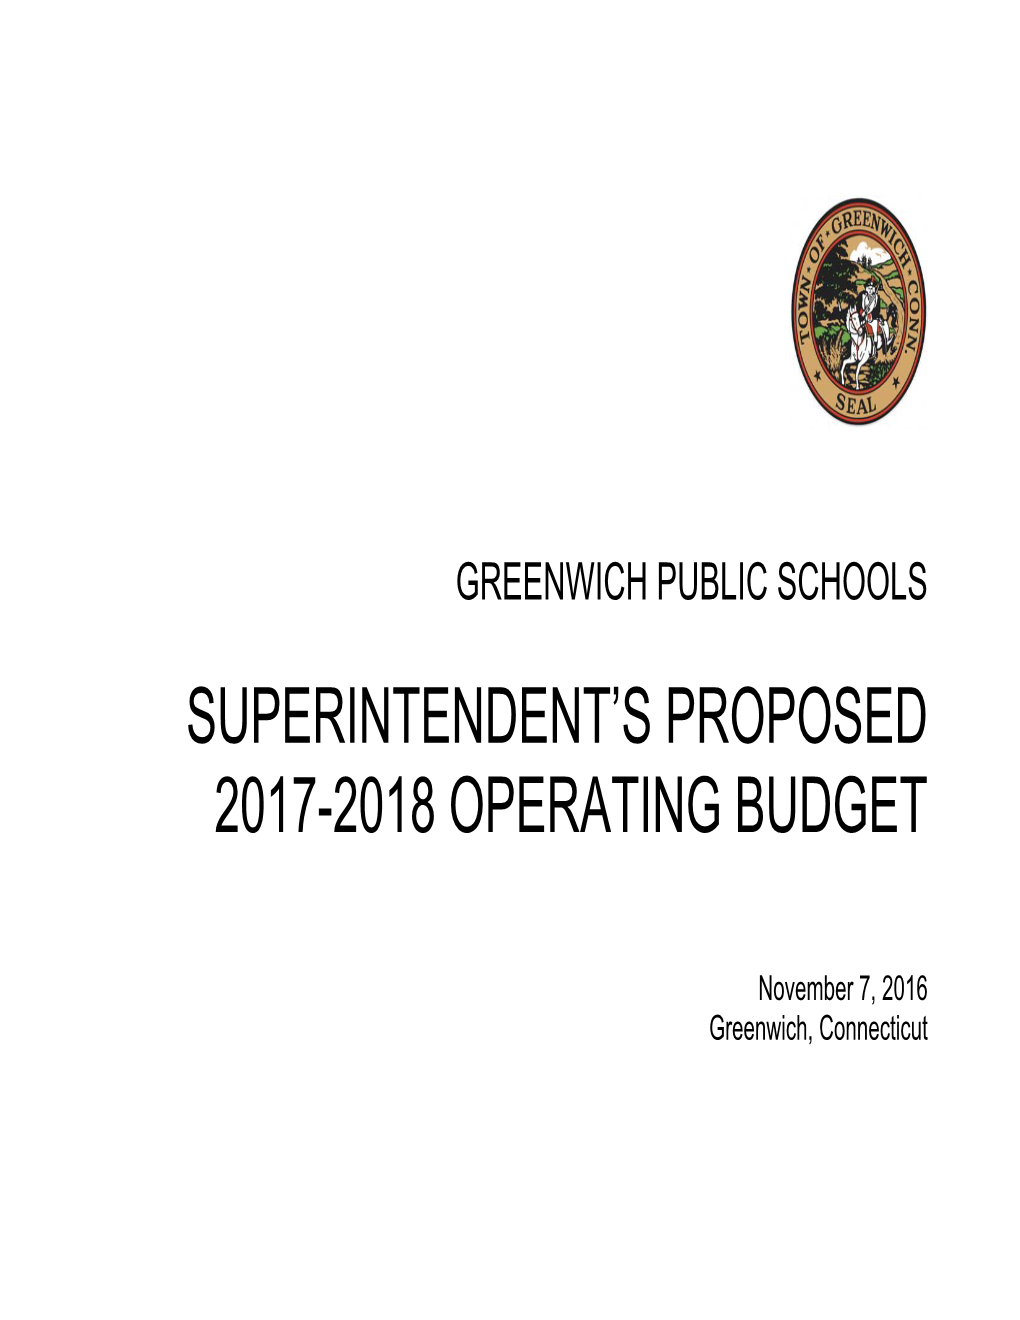 Superintendent's Proposed 2017-2018 Operating Budget